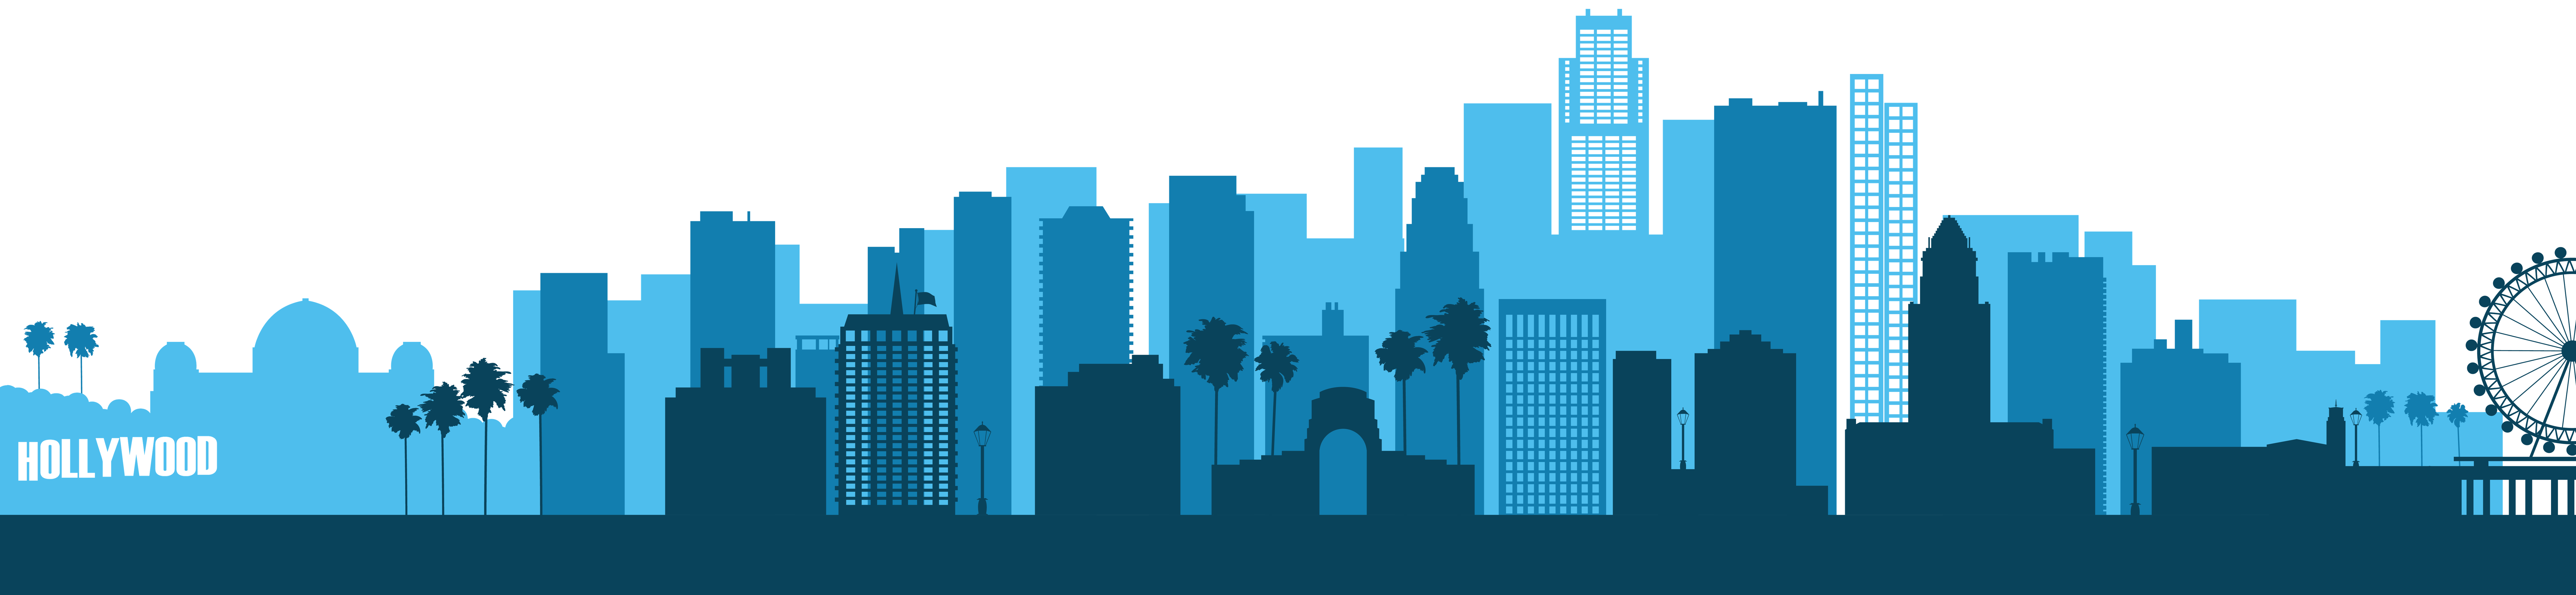 Cityscape illustration of Los Angeles County